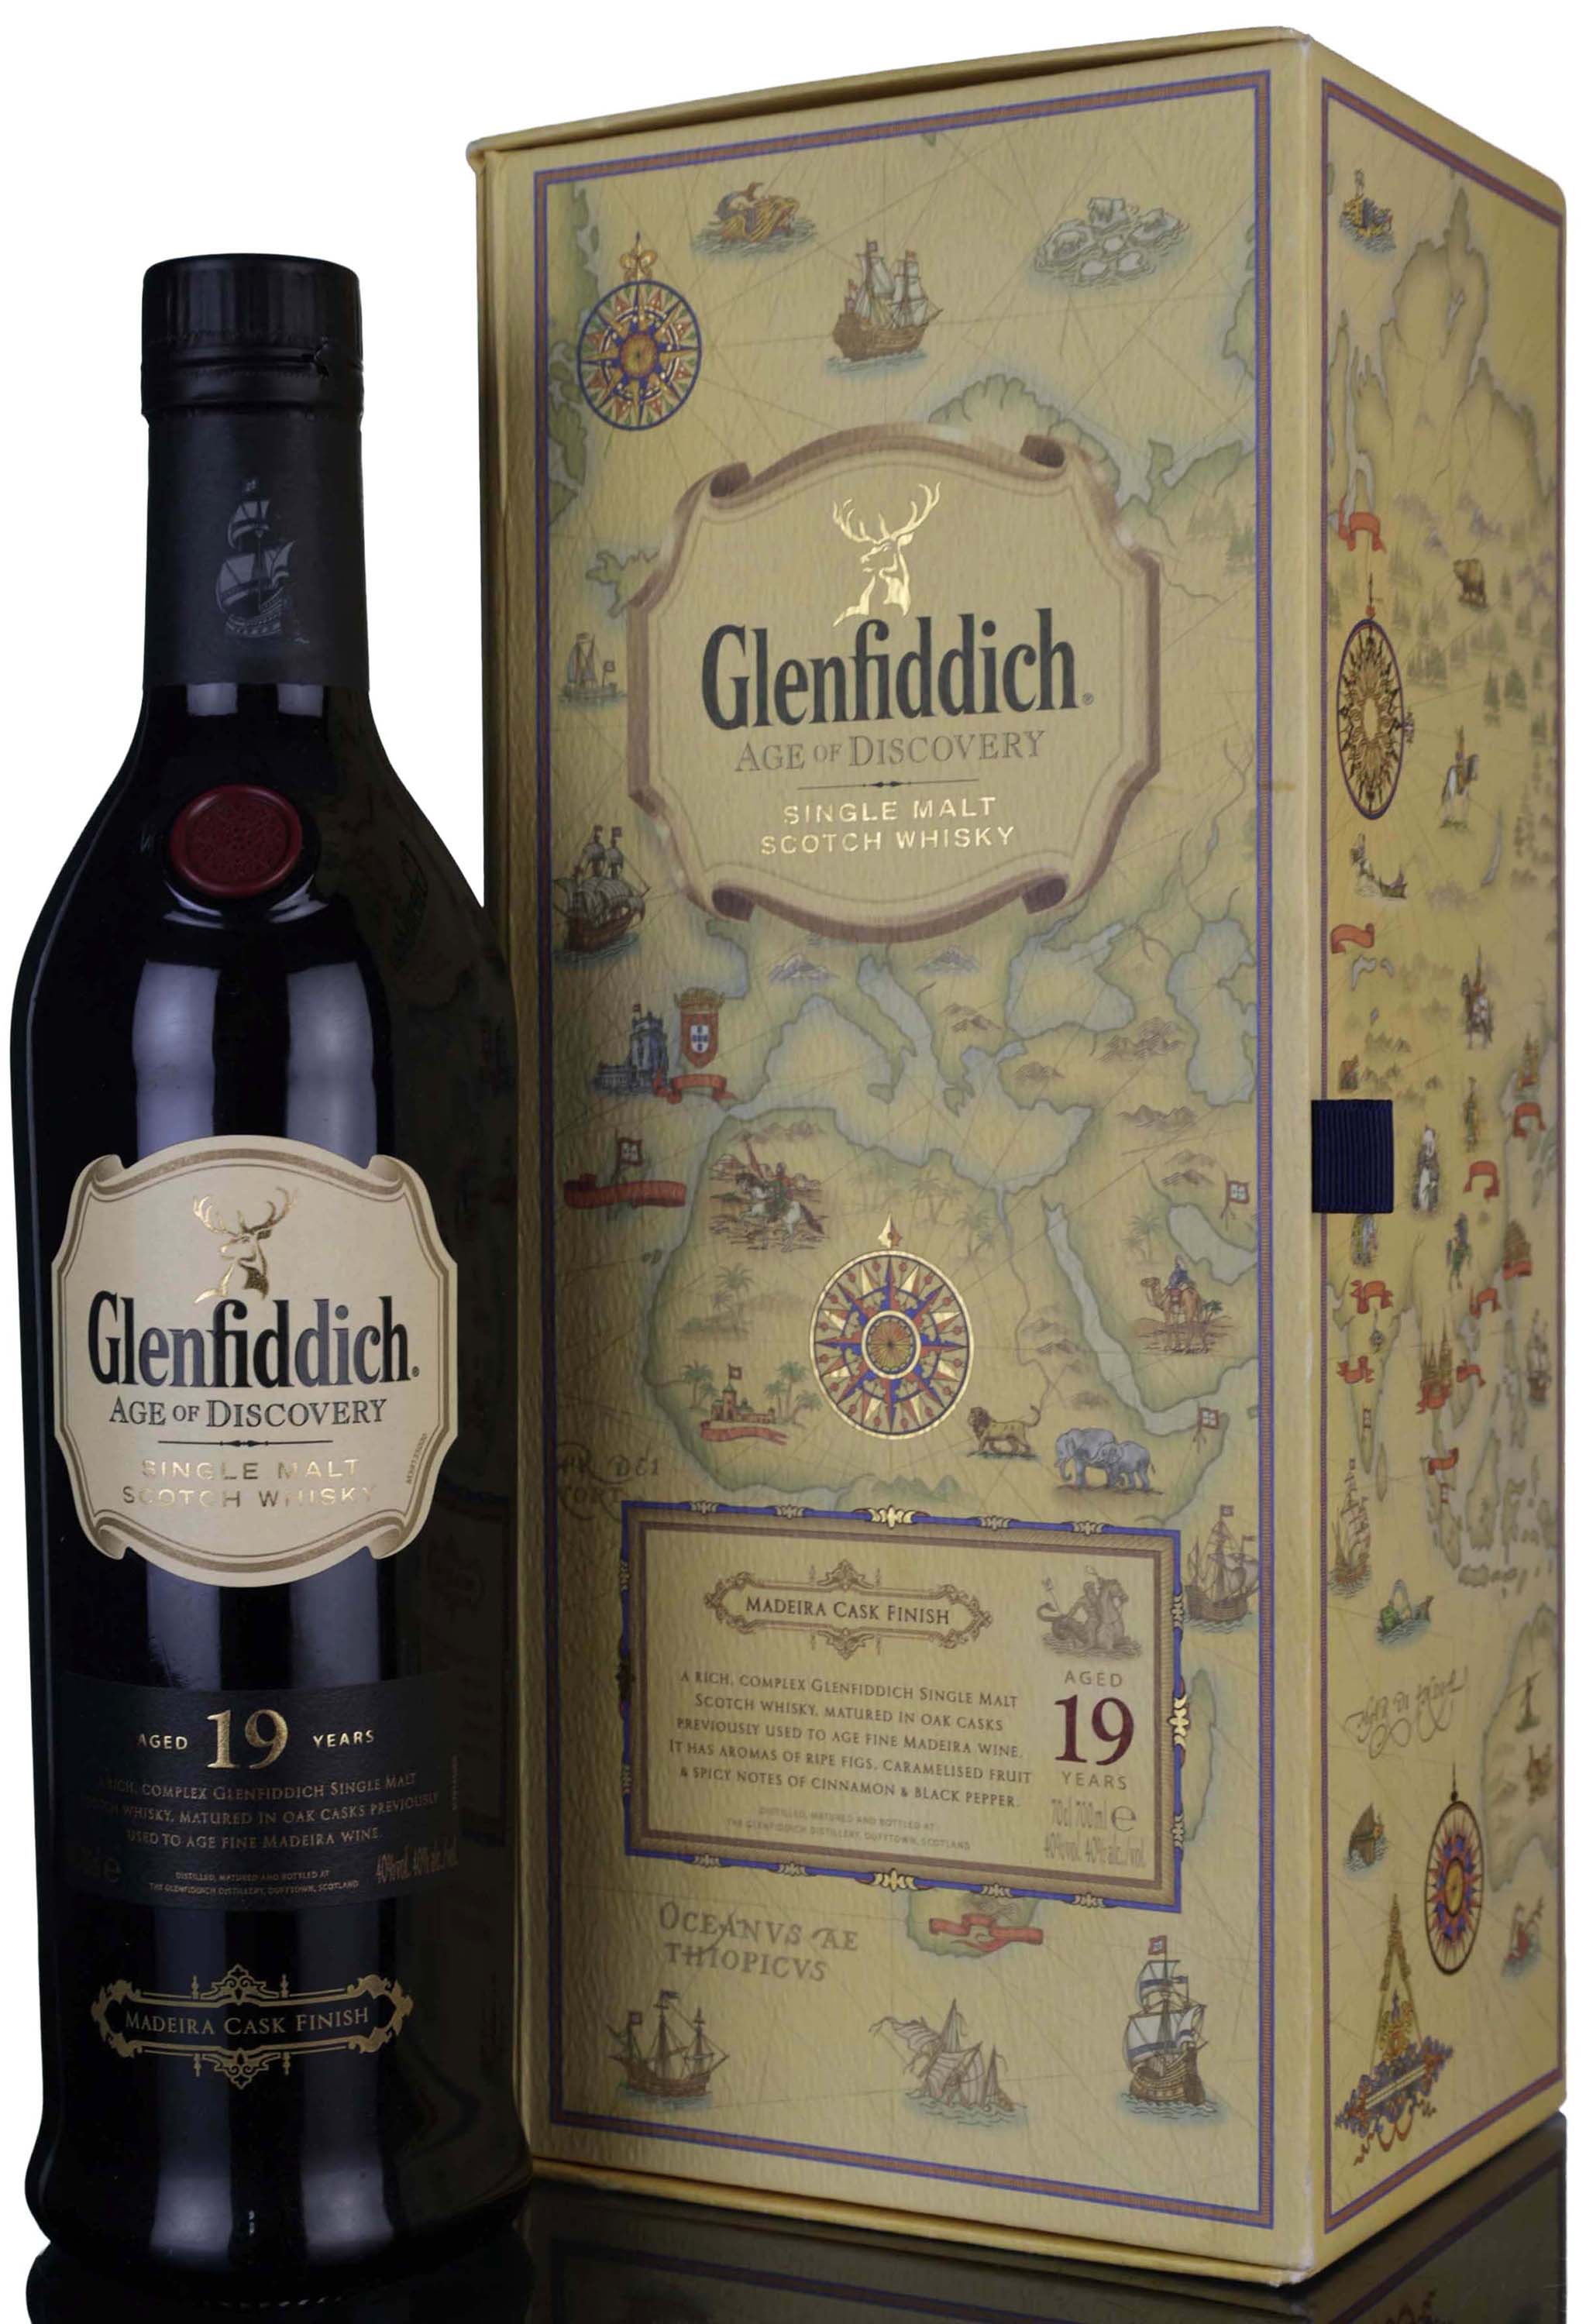 Glenfiddich 19 Year Old - Age Of Discovery - Madeira Cask Finish